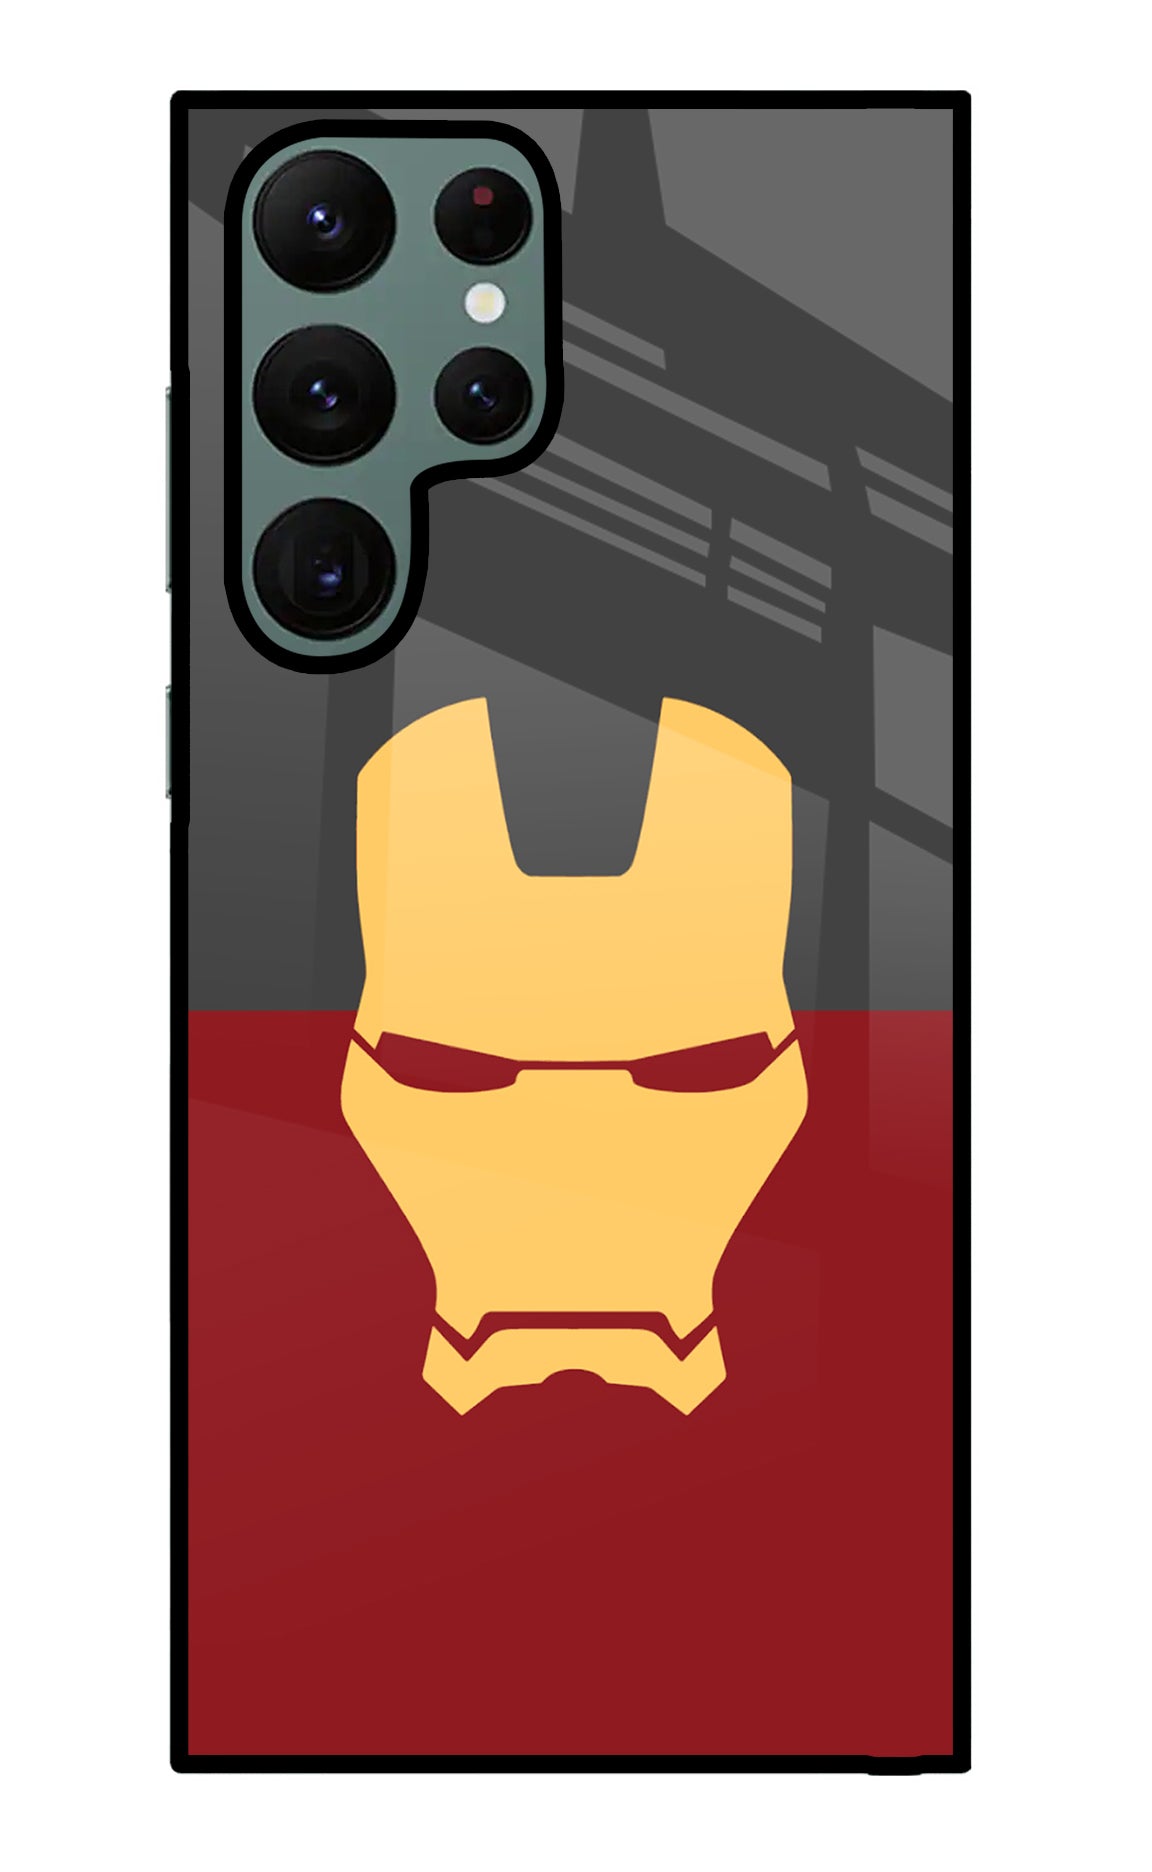 Ironman Samsung S22 Ultra Back Cover